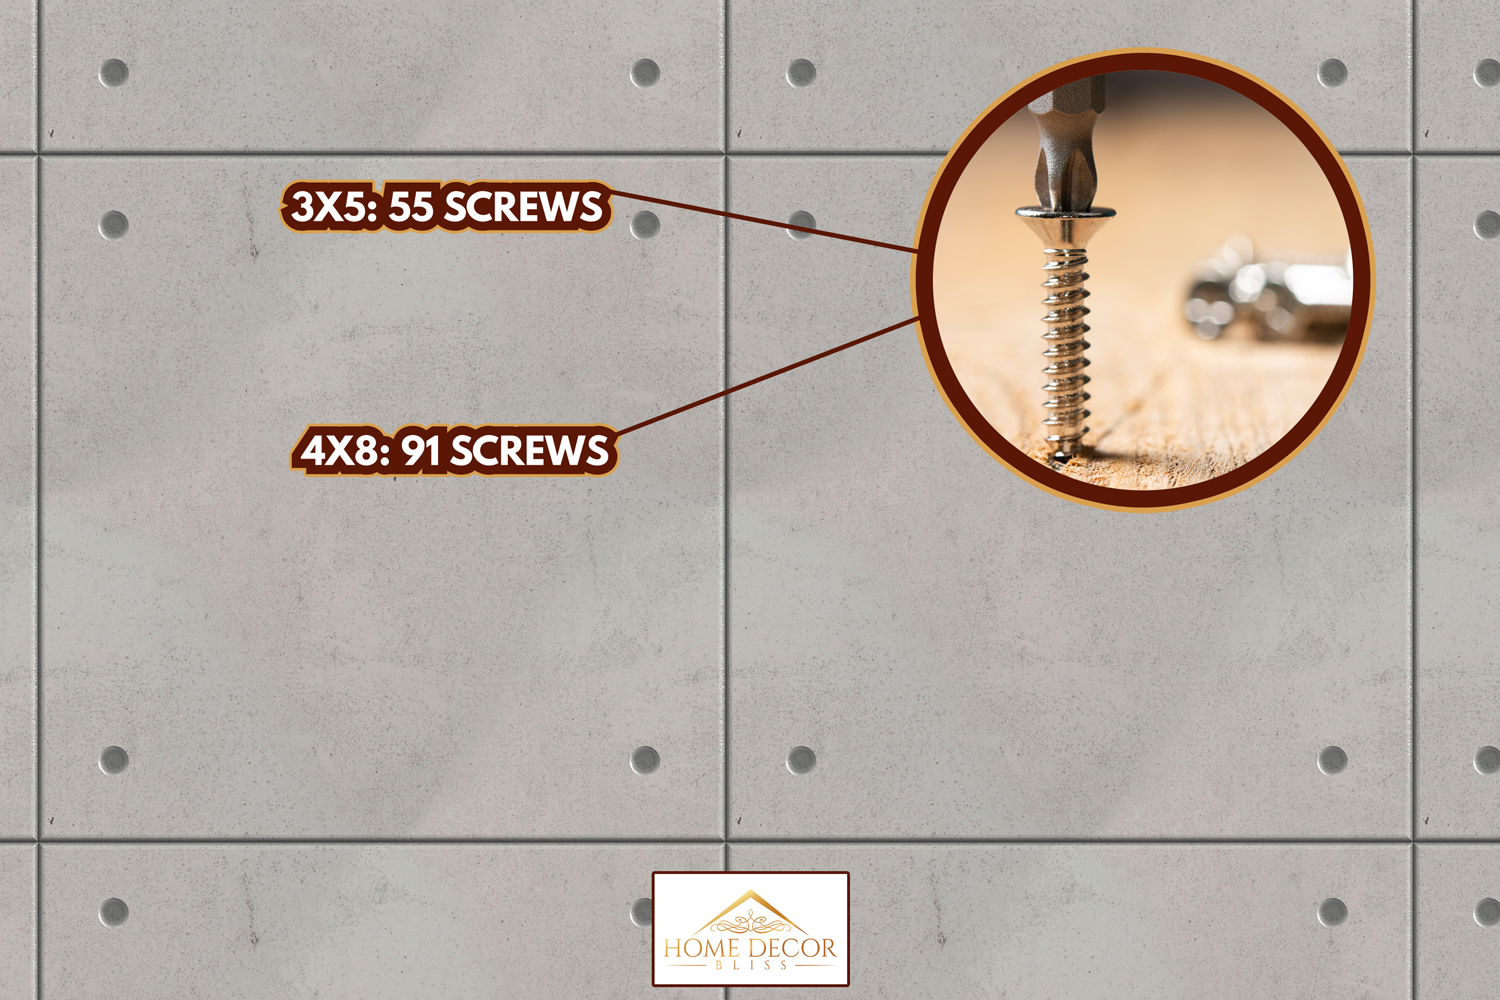 Architectural concrete Background & Textures - How Many Screws Per Backer Board